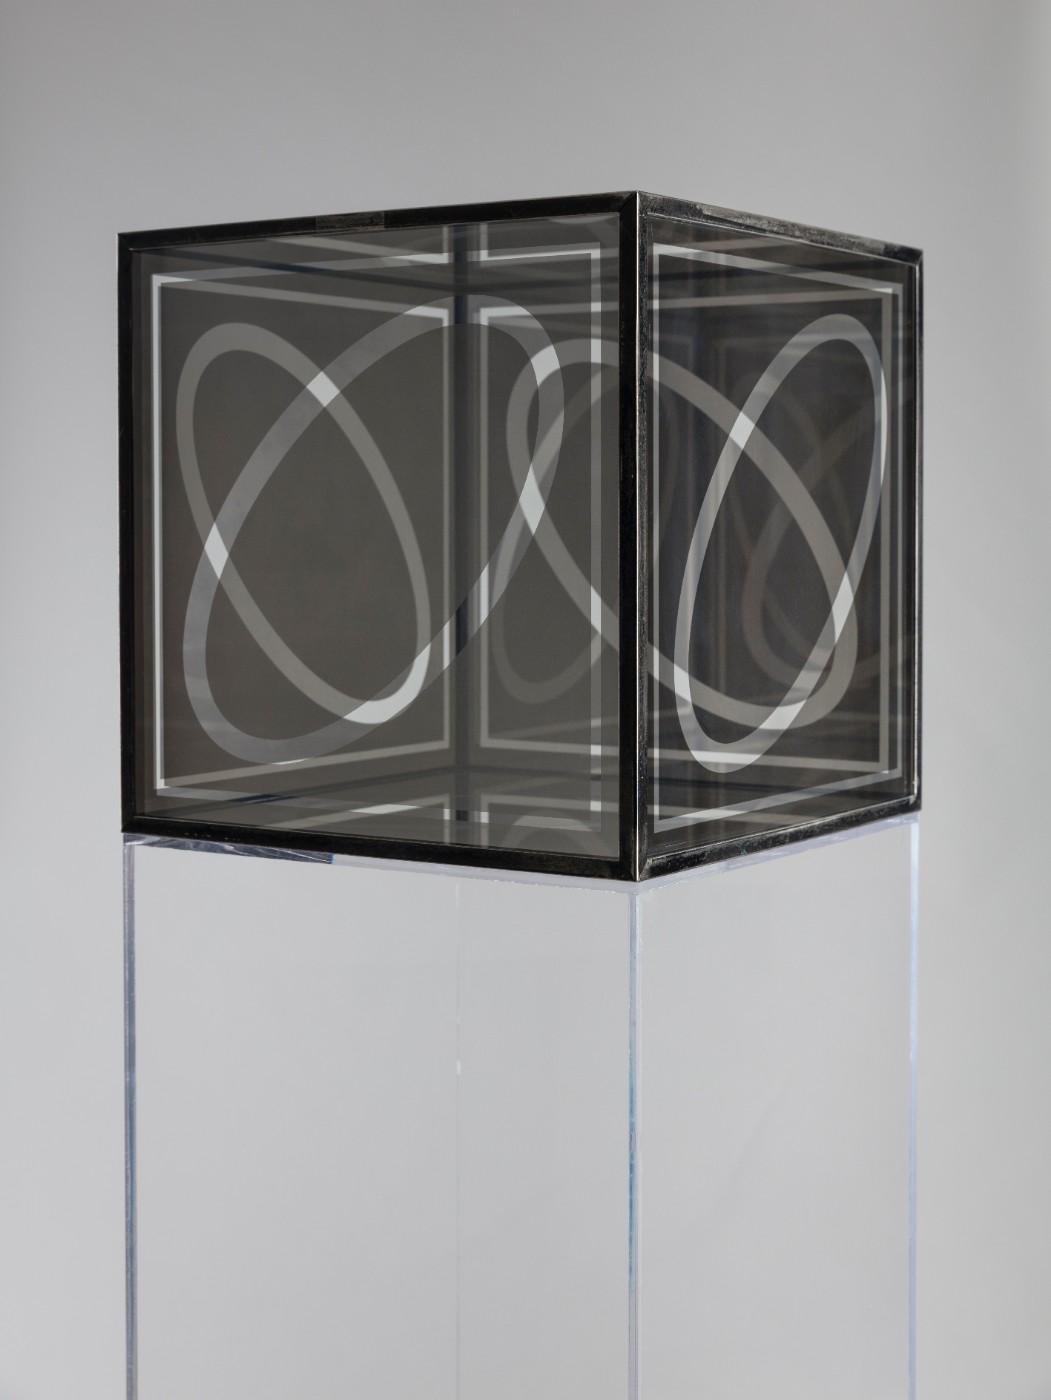 Larry Bell, Untitled (Cube 12”), 1964. Nickel plated glass and chrome plated brass.